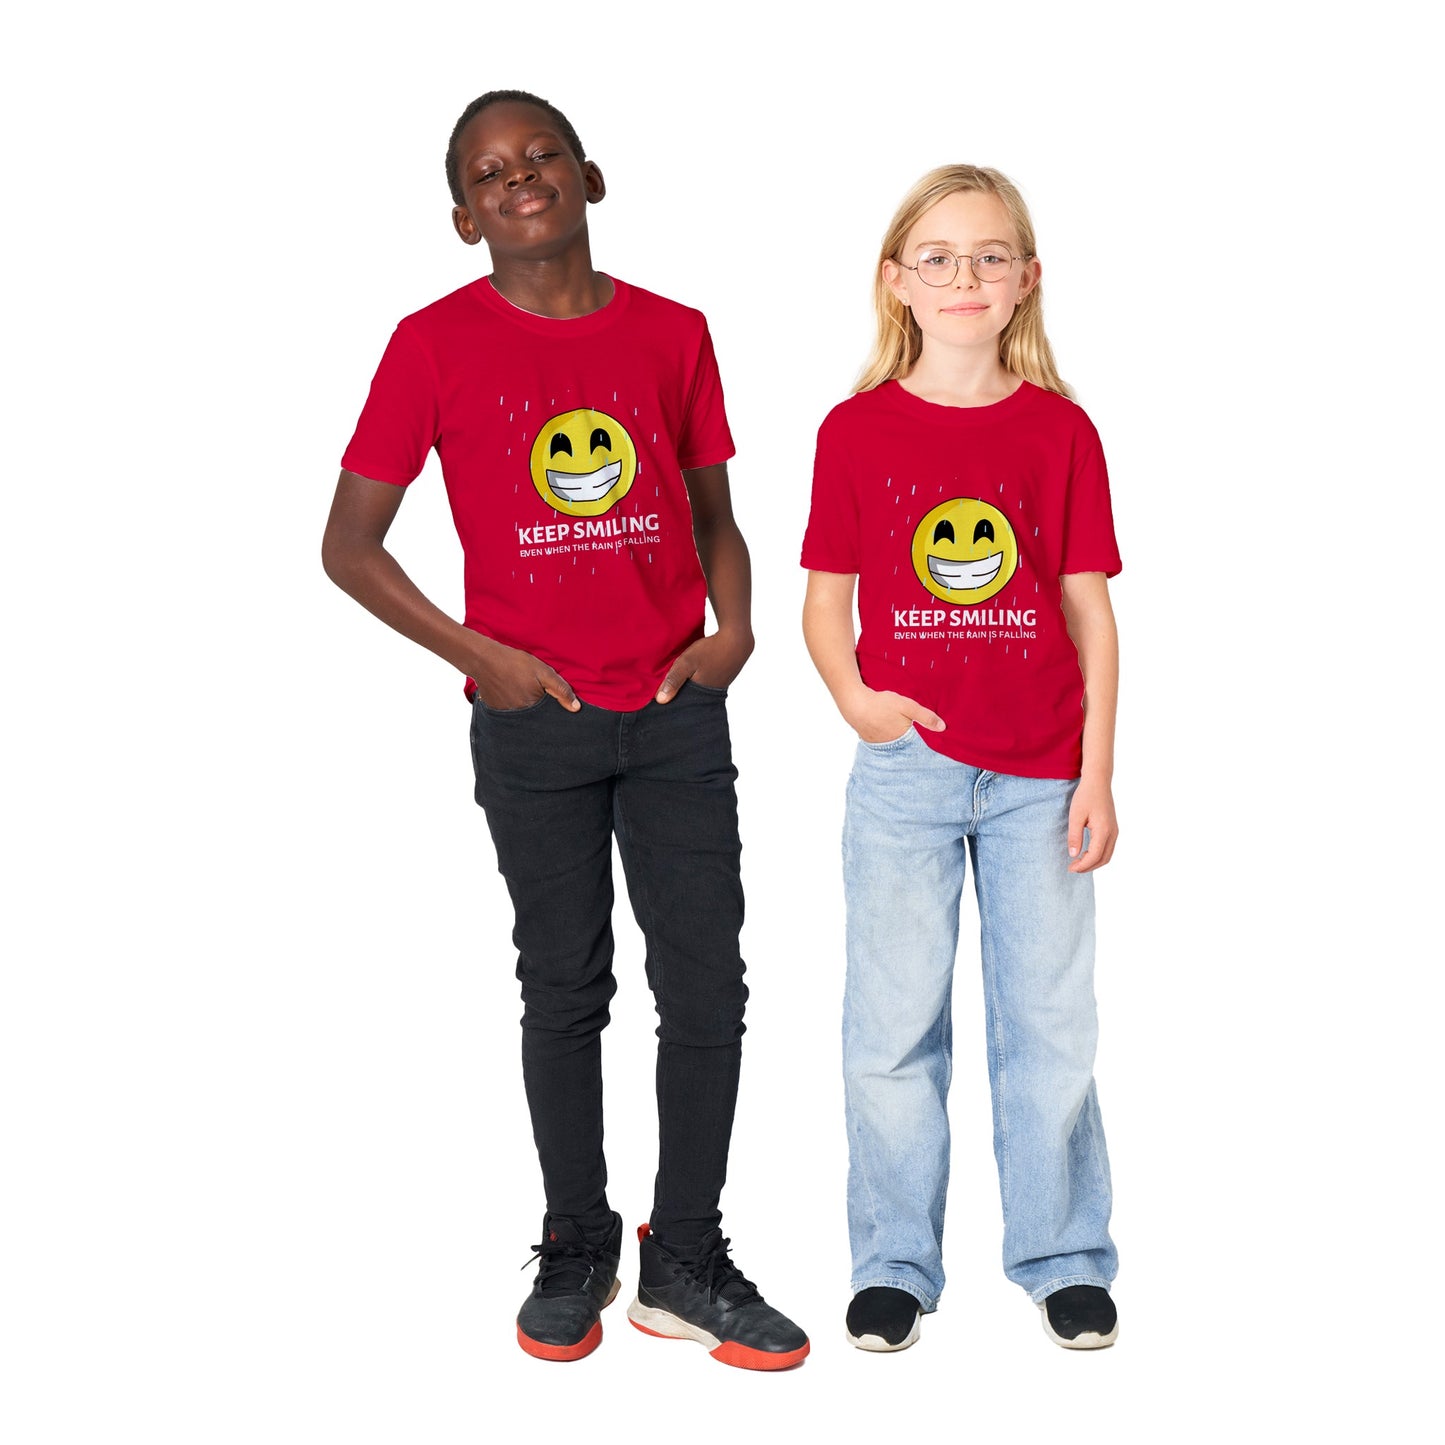 Inspirational Kids T-Shirt with a positive affirmation: "I Keep Smiling, even when the rain is falling". An image of an emoji smiling and drop of rain - red tee